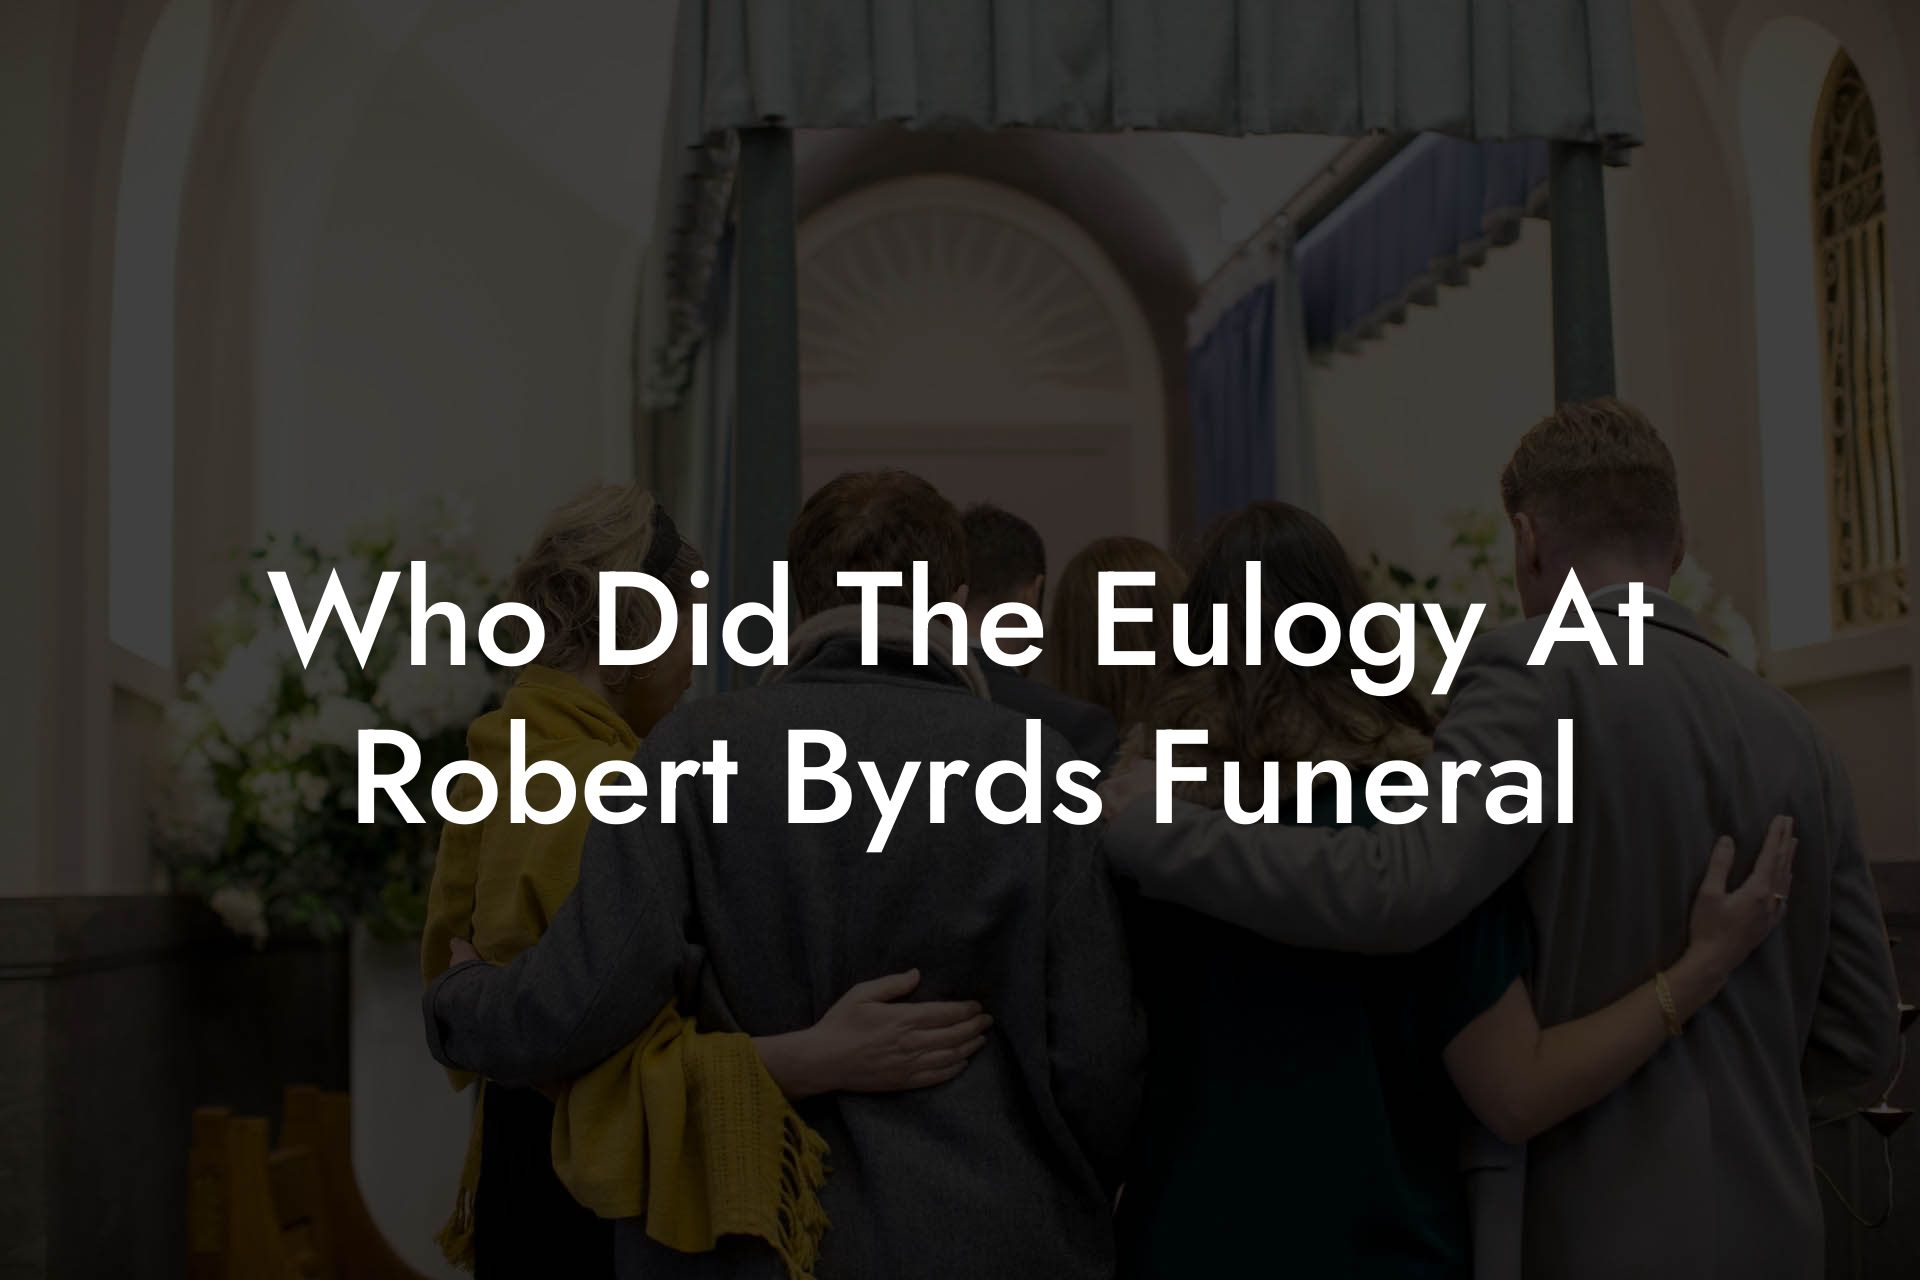 Who Did The Eulogy At Robert Byrds Funeral